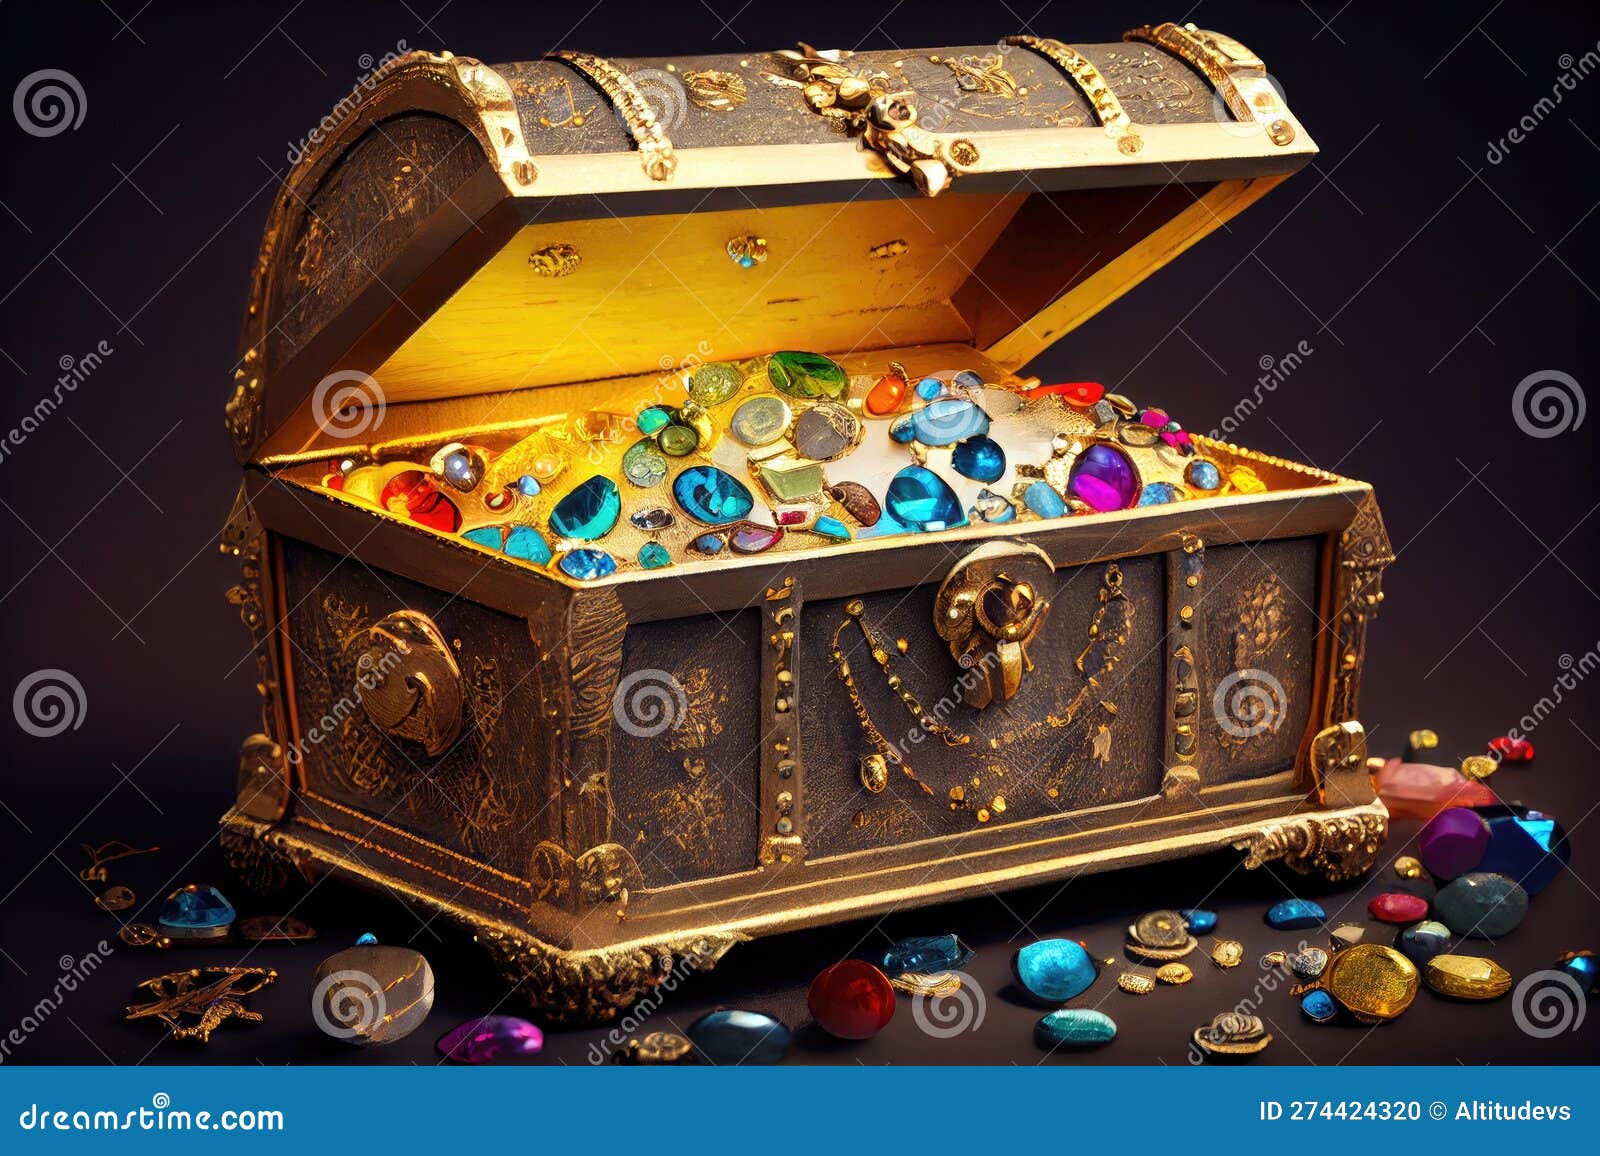 Treasure Chest Overflowing with Gold and Jewels Stock Illustration -  Illustration of ship, pirate: 274424320